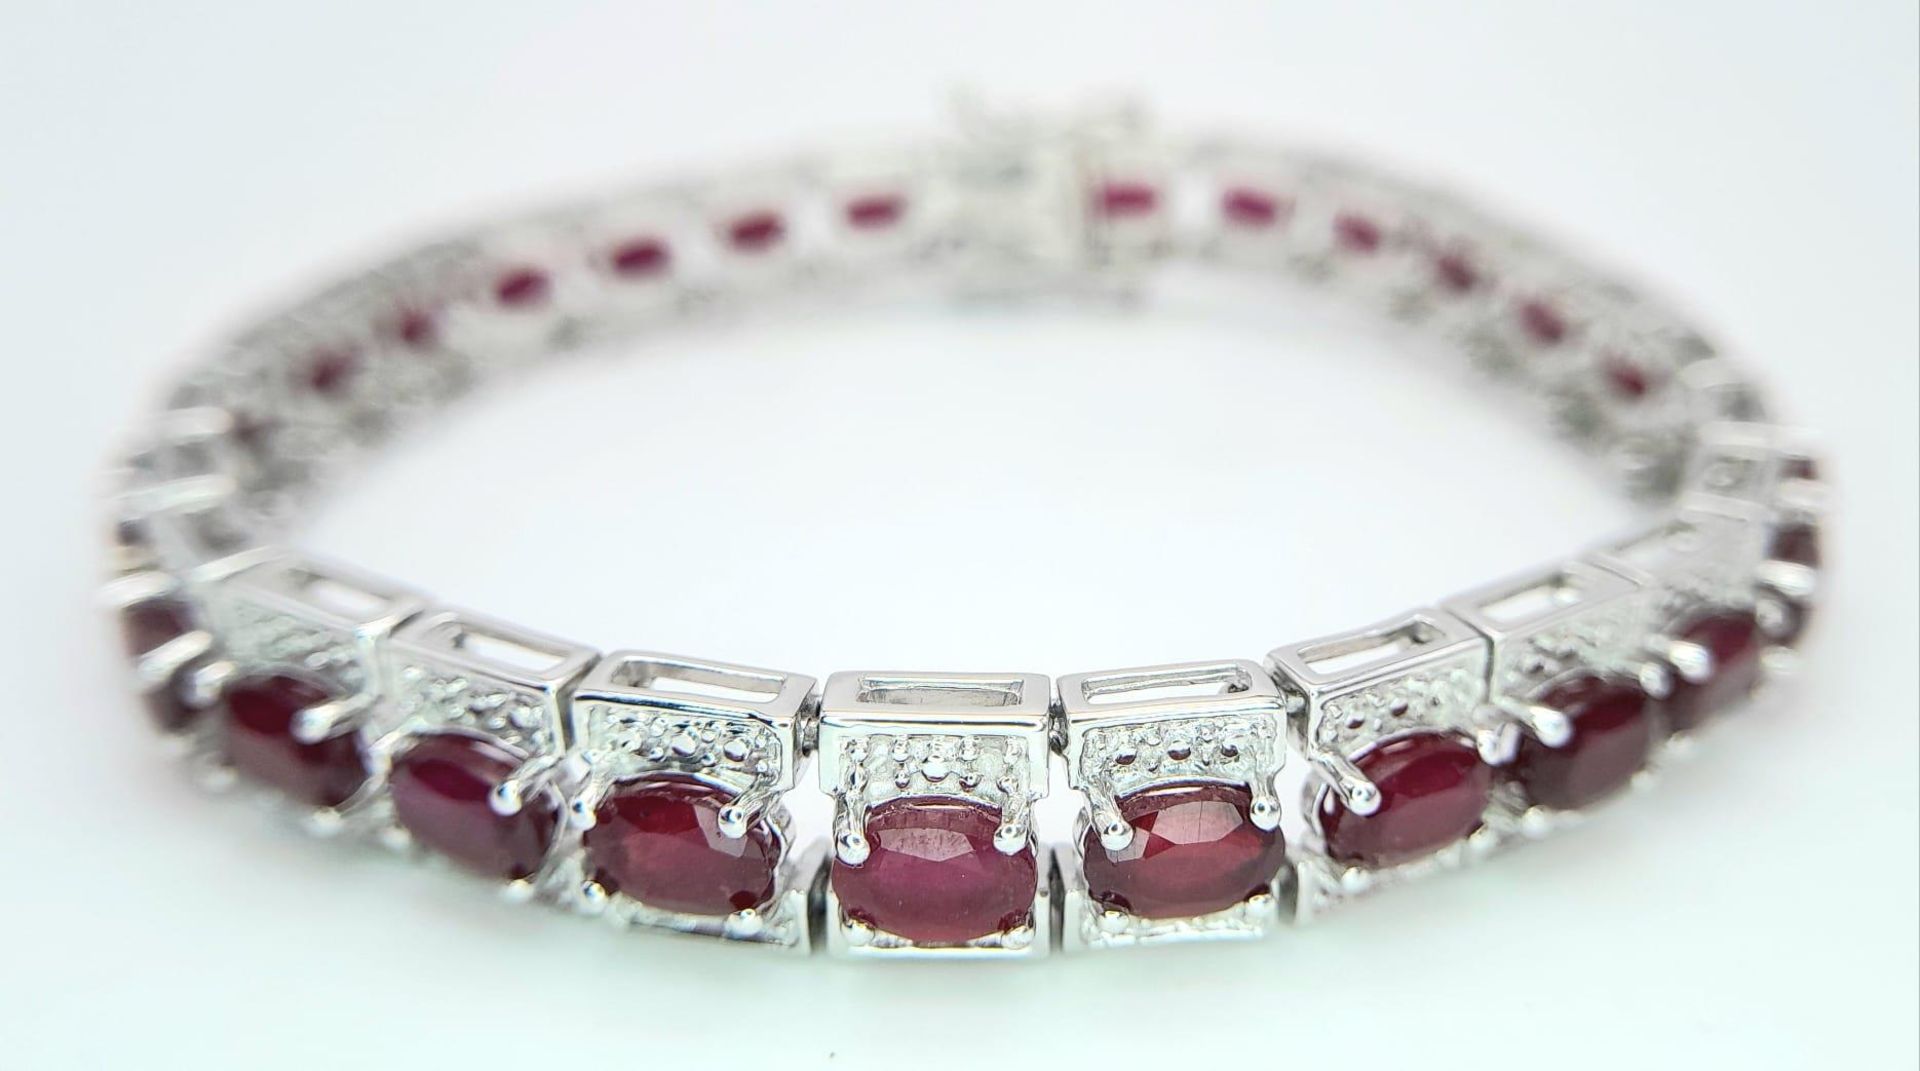 An Exquisite Hallmarked 2018 Sterling Silver 28 Oval Cut Ruby Set Bracelet. Each Ruby Measures 5mm - Image 2 of 6